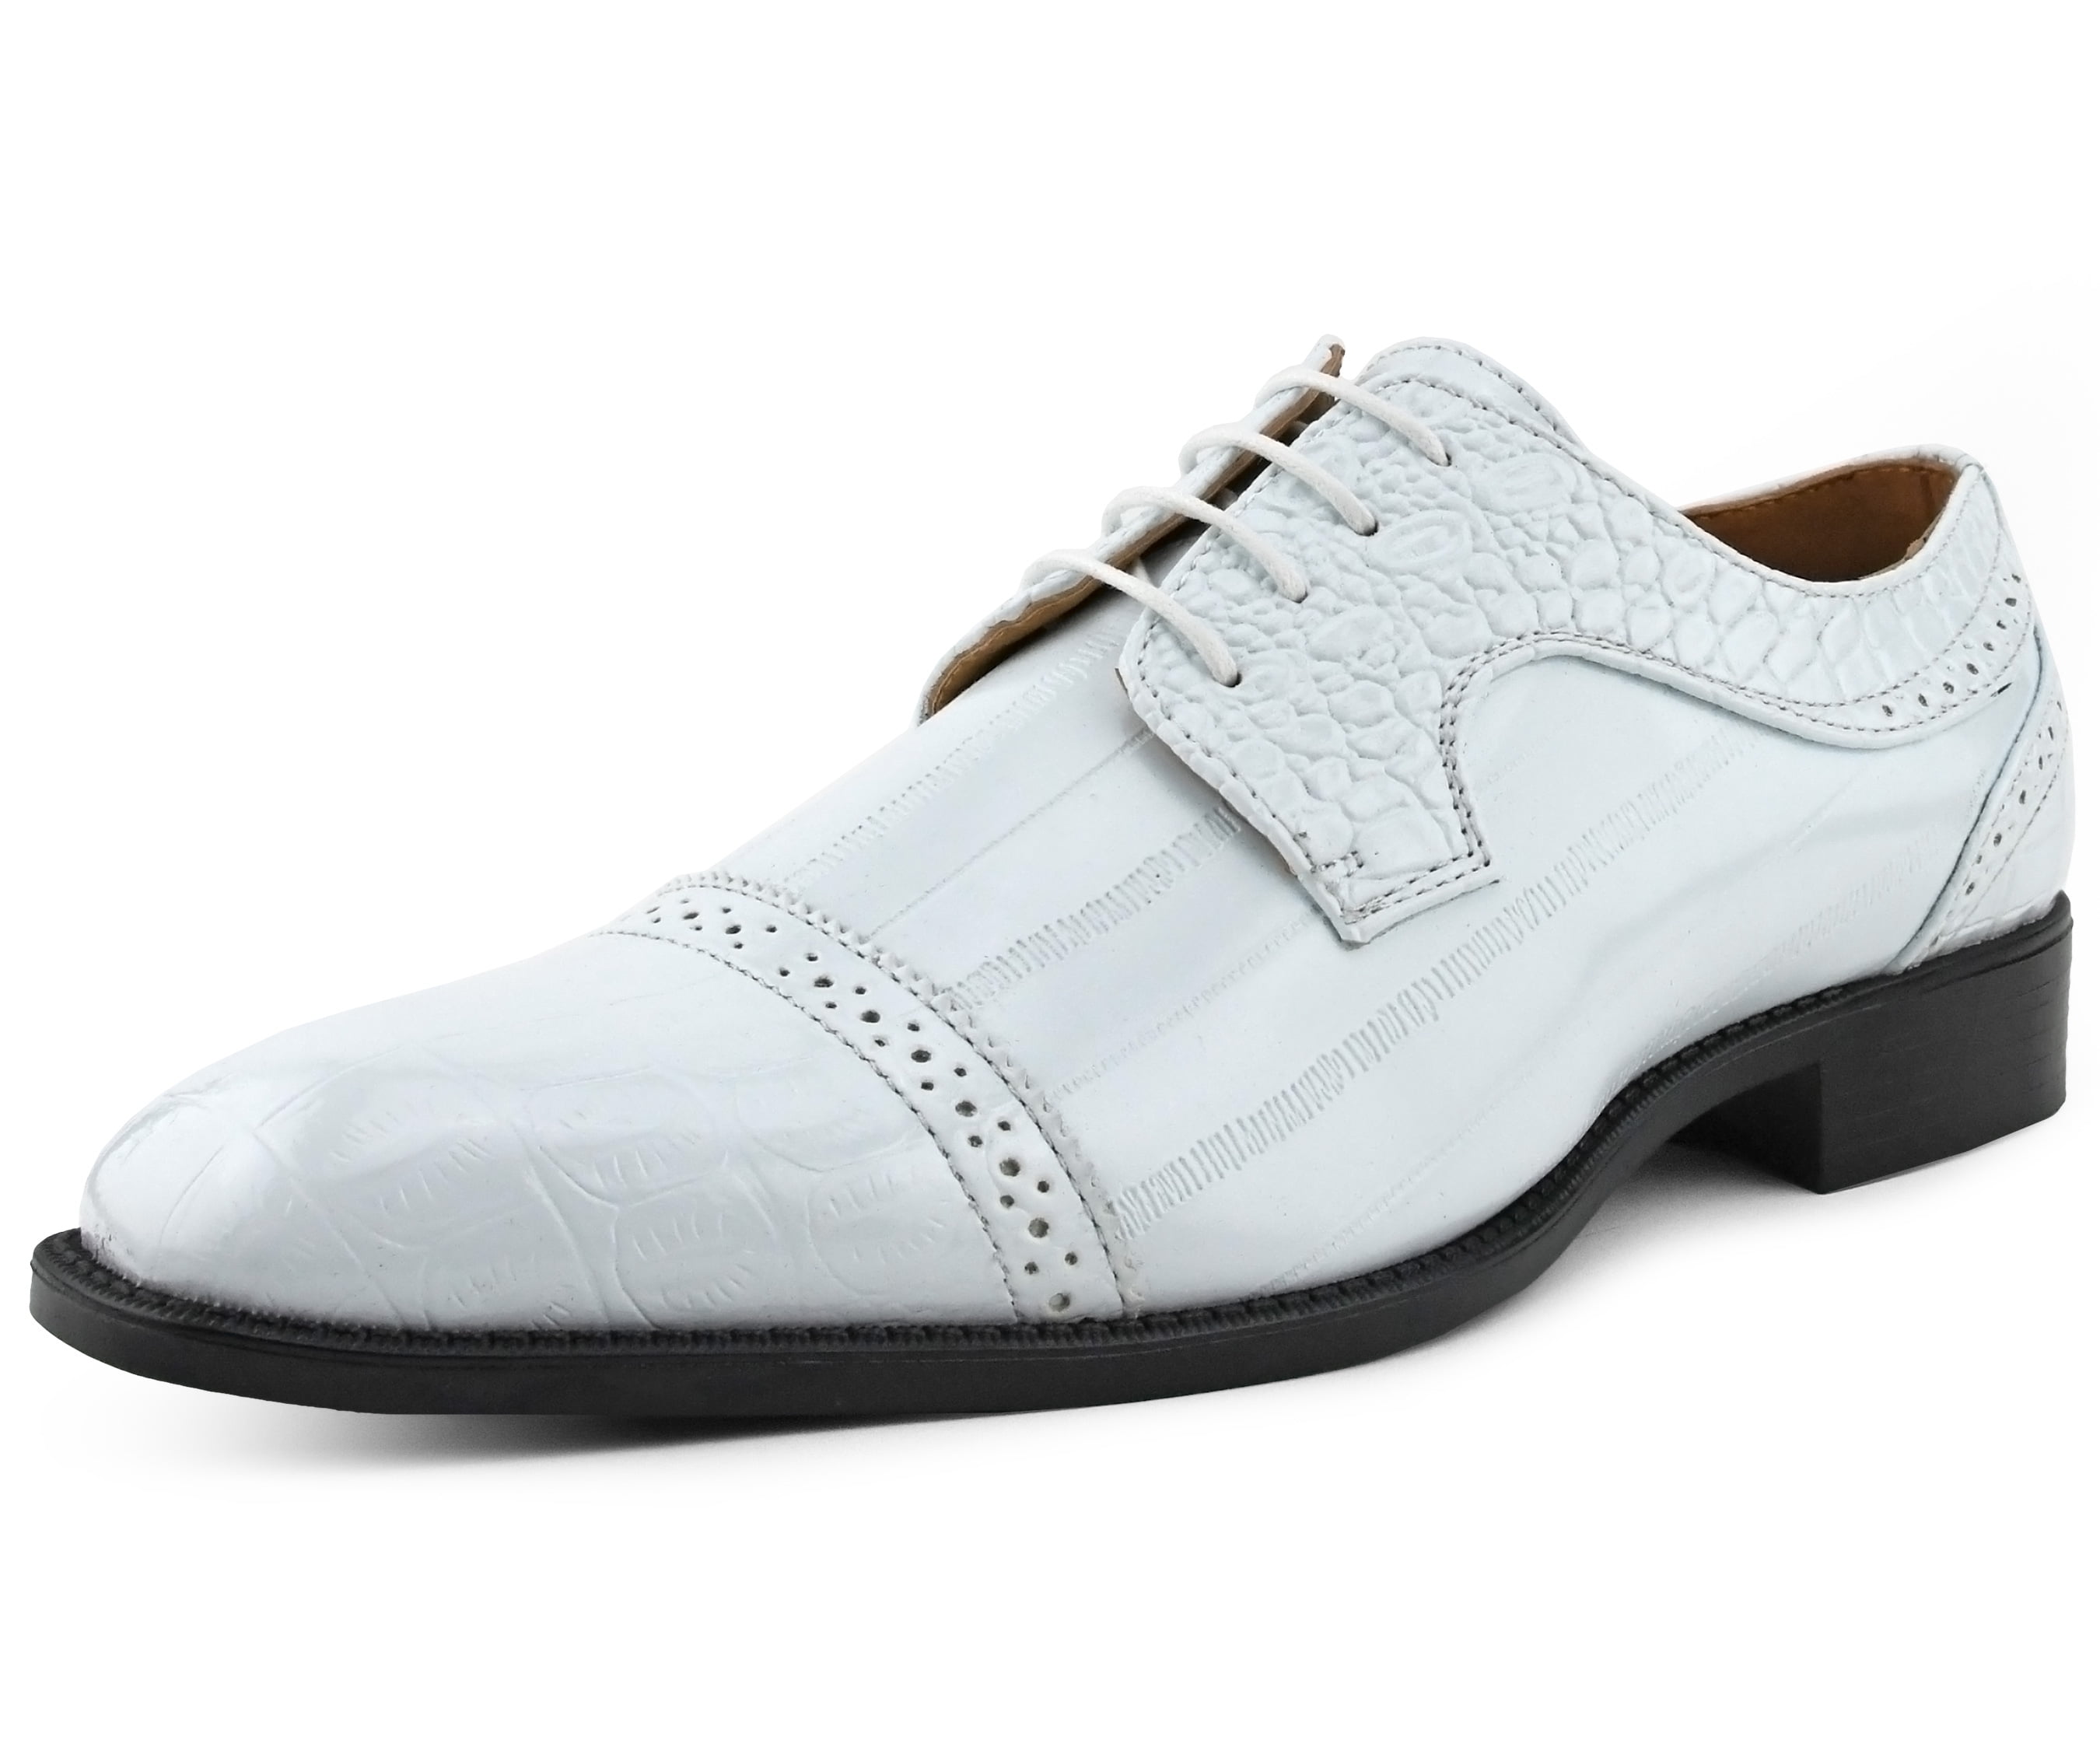 Elwyn-052 Bolano Mens Two-Tone Royal & White Smooth Dress Shoe w/ Wing-Tip 